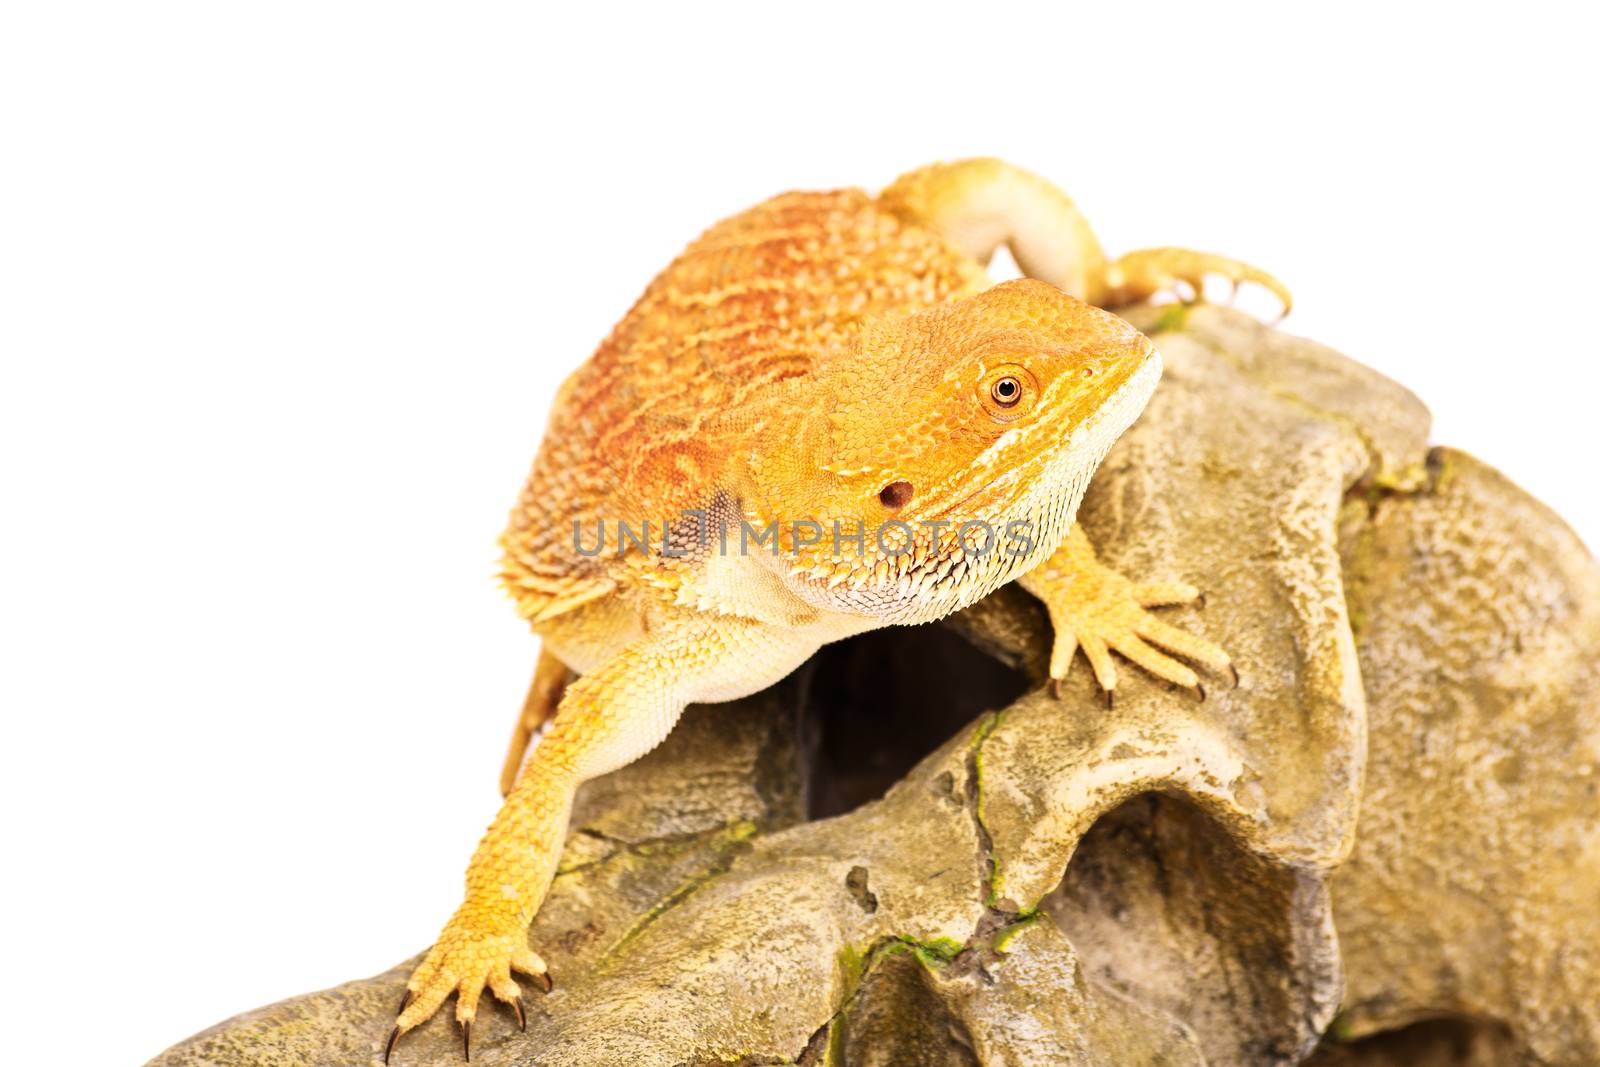 Bearded dragon in movement by Mendelex